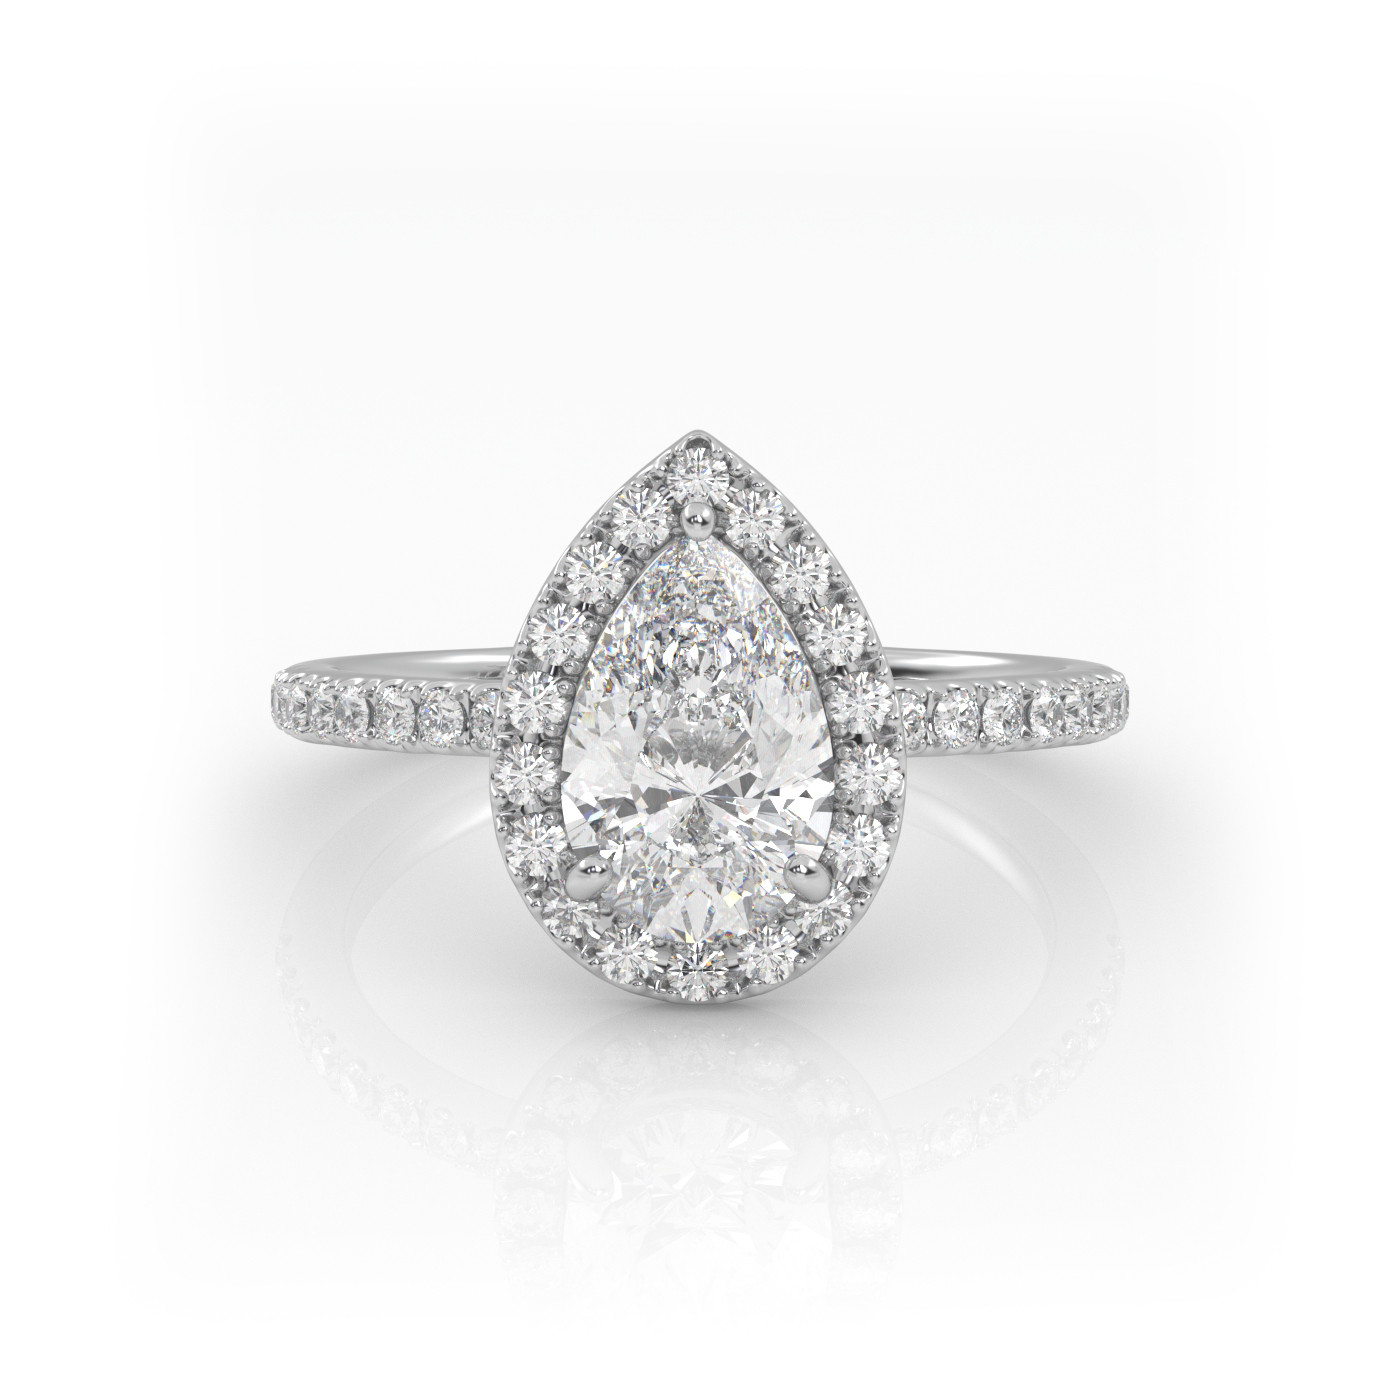 18K WHITE GOLD Pear Shaped Diamond Engagament Ring with Halo and Pave style